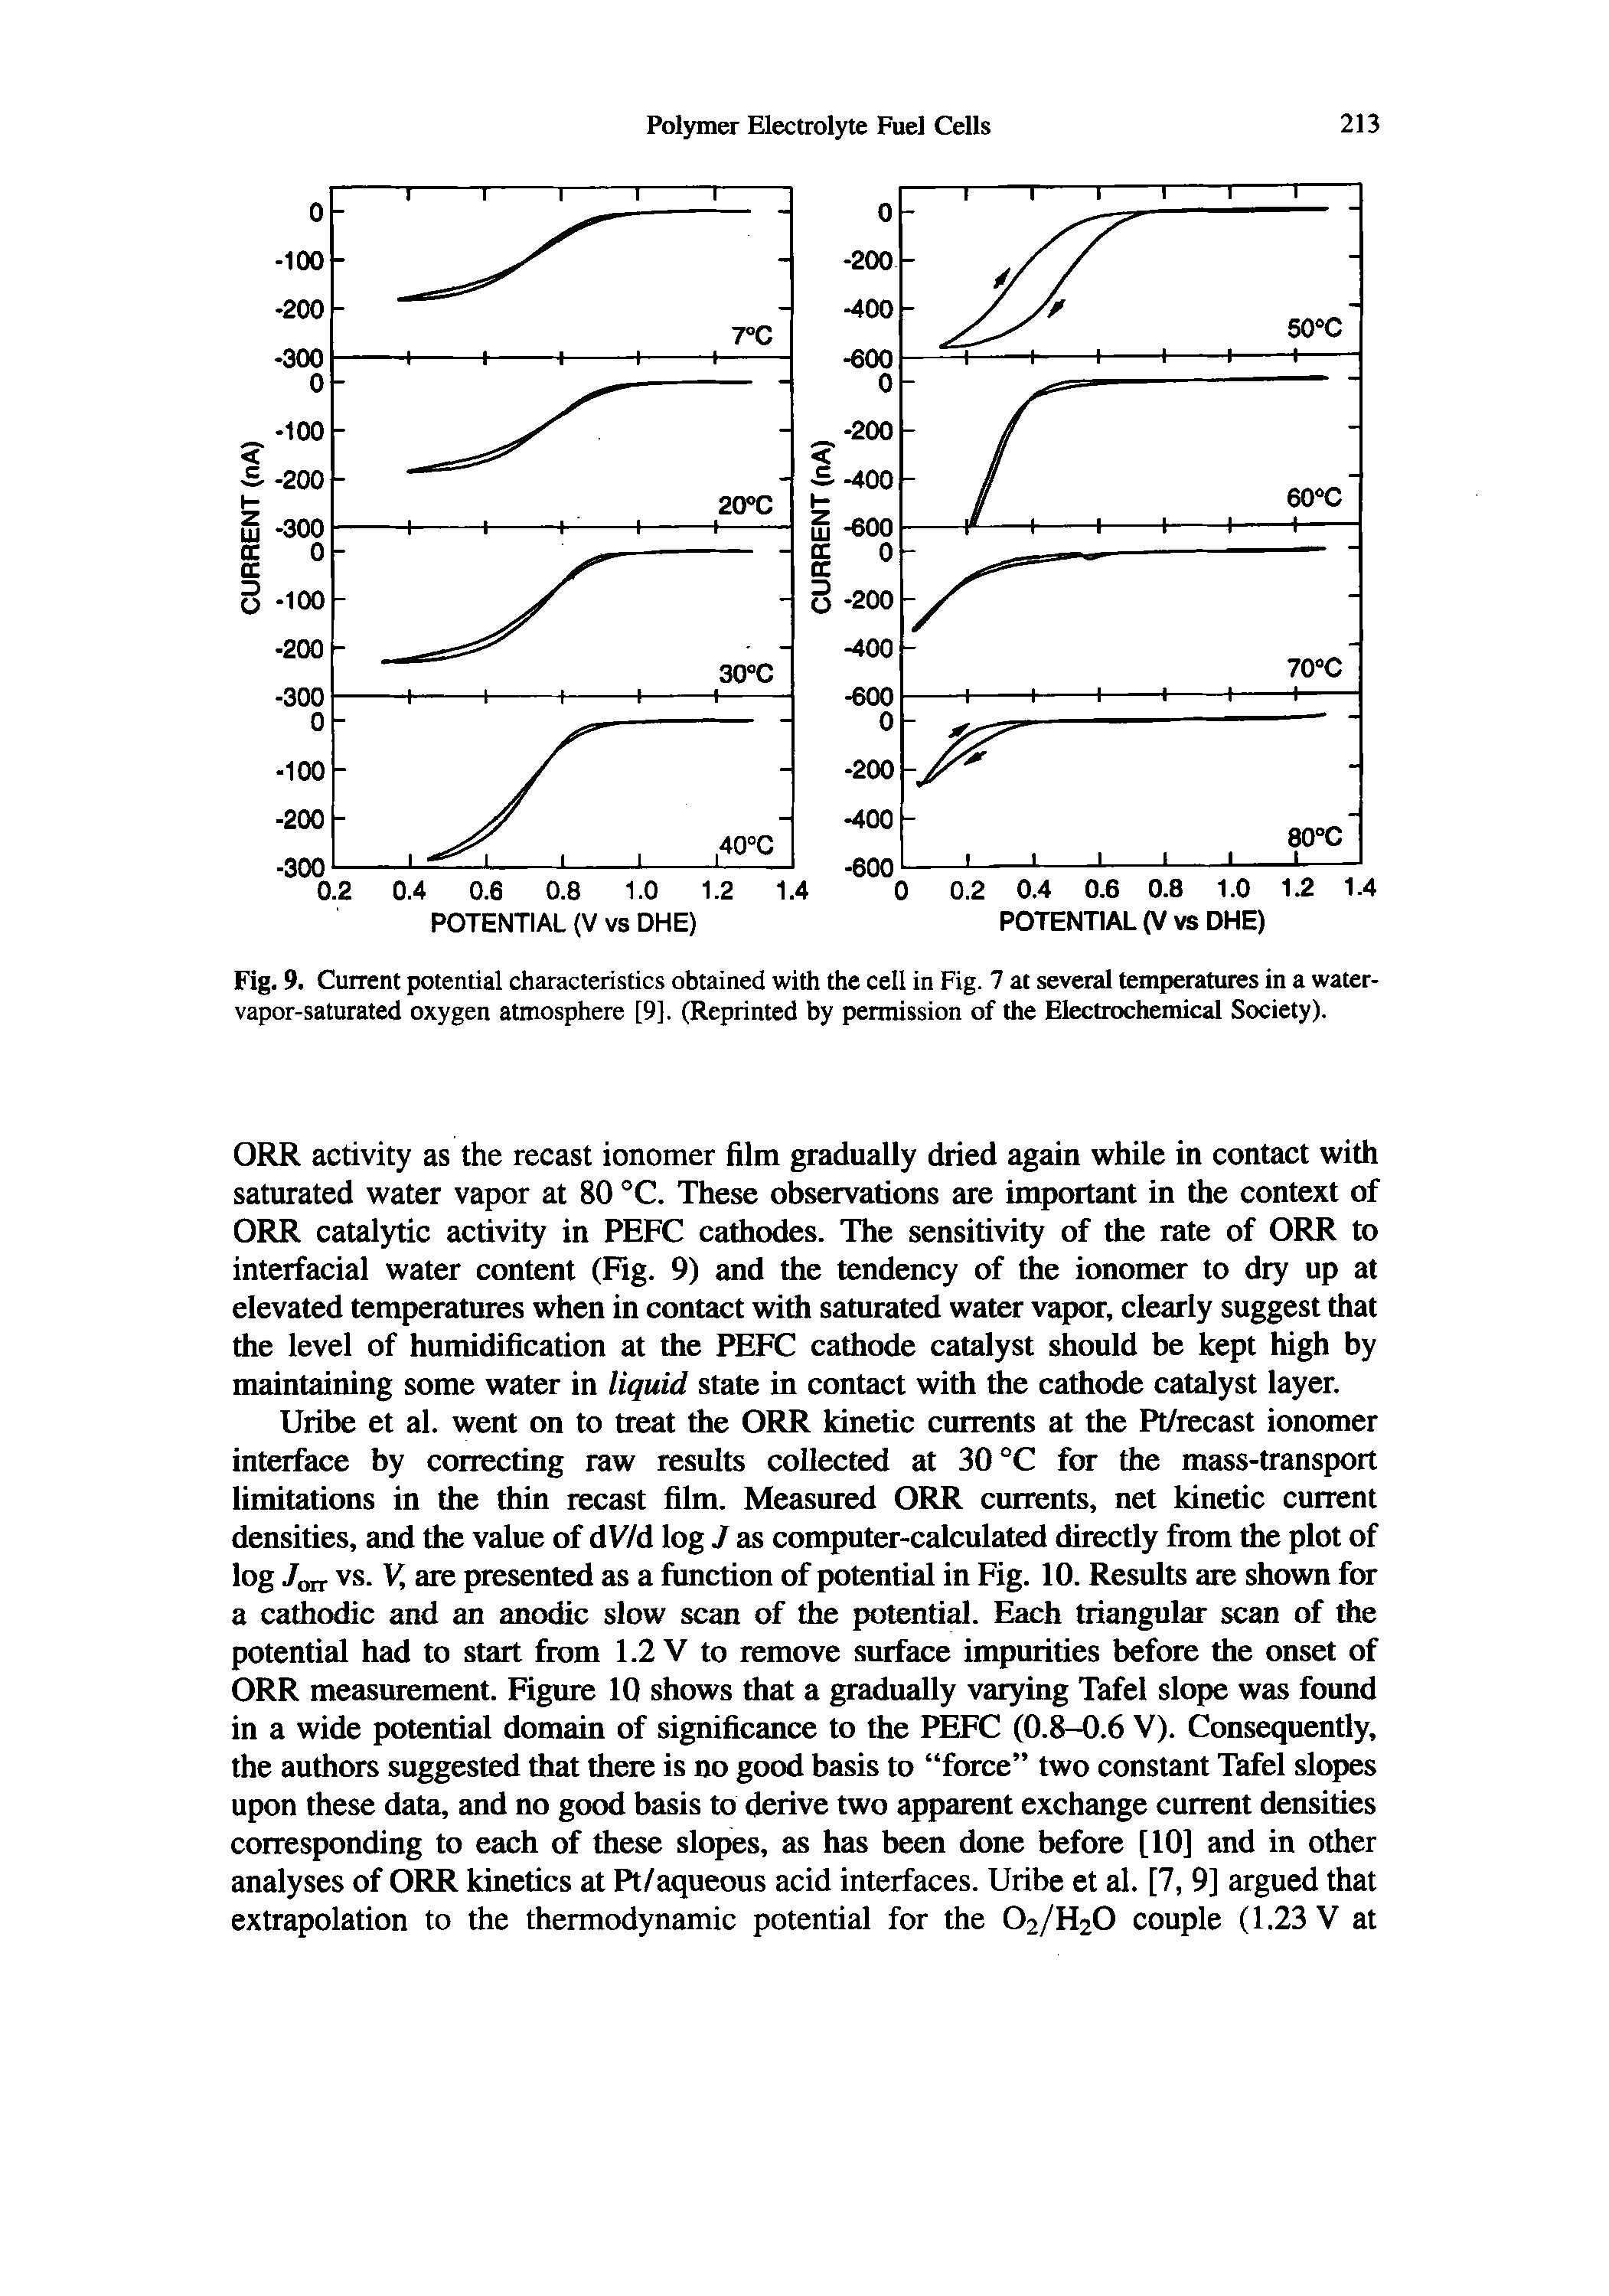 Fig. 9. Current potential characteristics obtained with the cell in Fig. 7 at several temperatures in a water-vapor-saturated oxygen atmosphere [9], (Reprinted by permission of the Electrochemical Society).